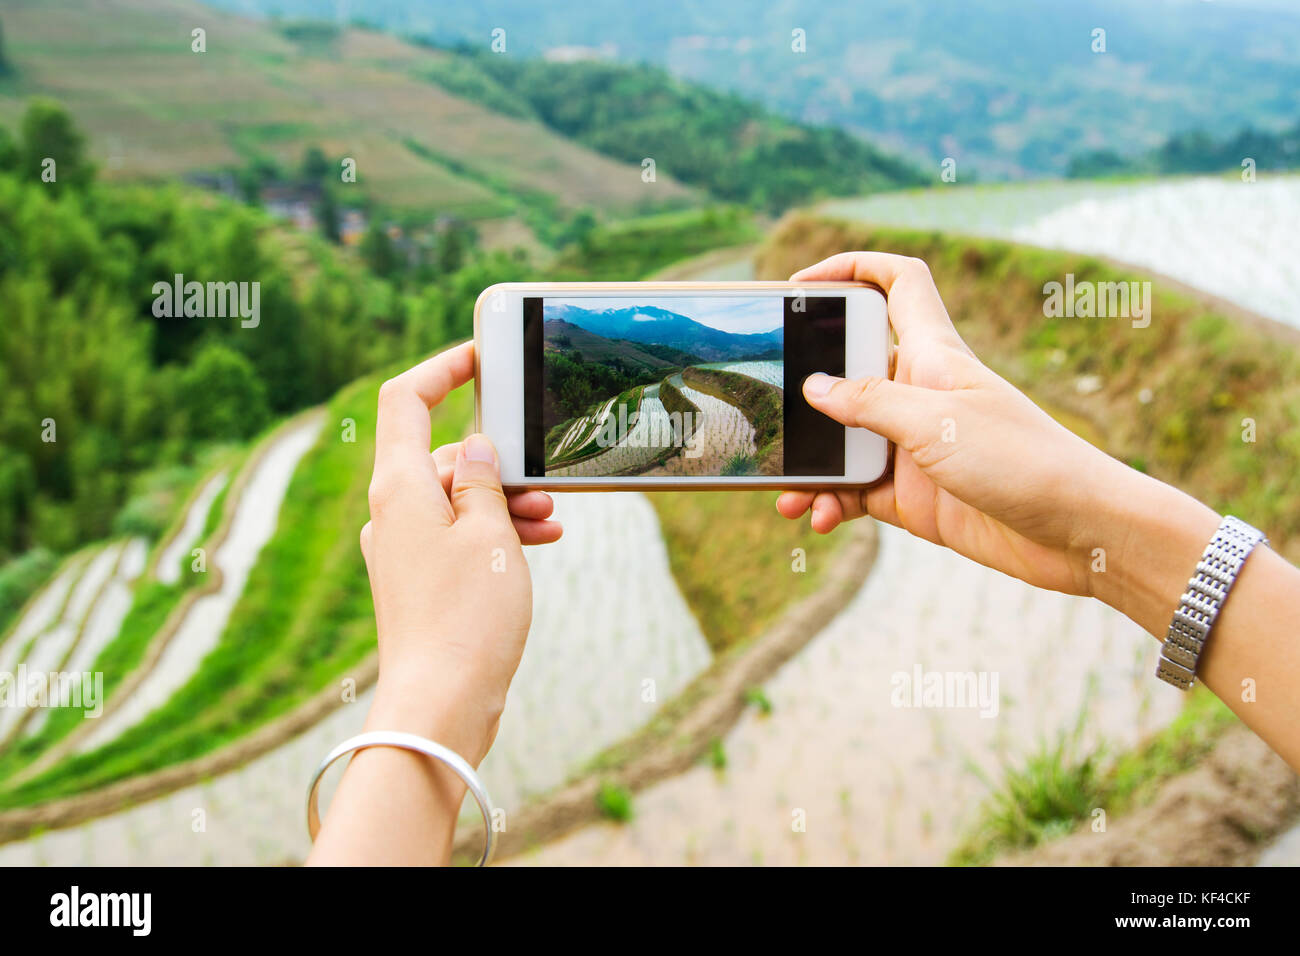 Girl capturing rice terrace scenery with a smart phone Stock Photo